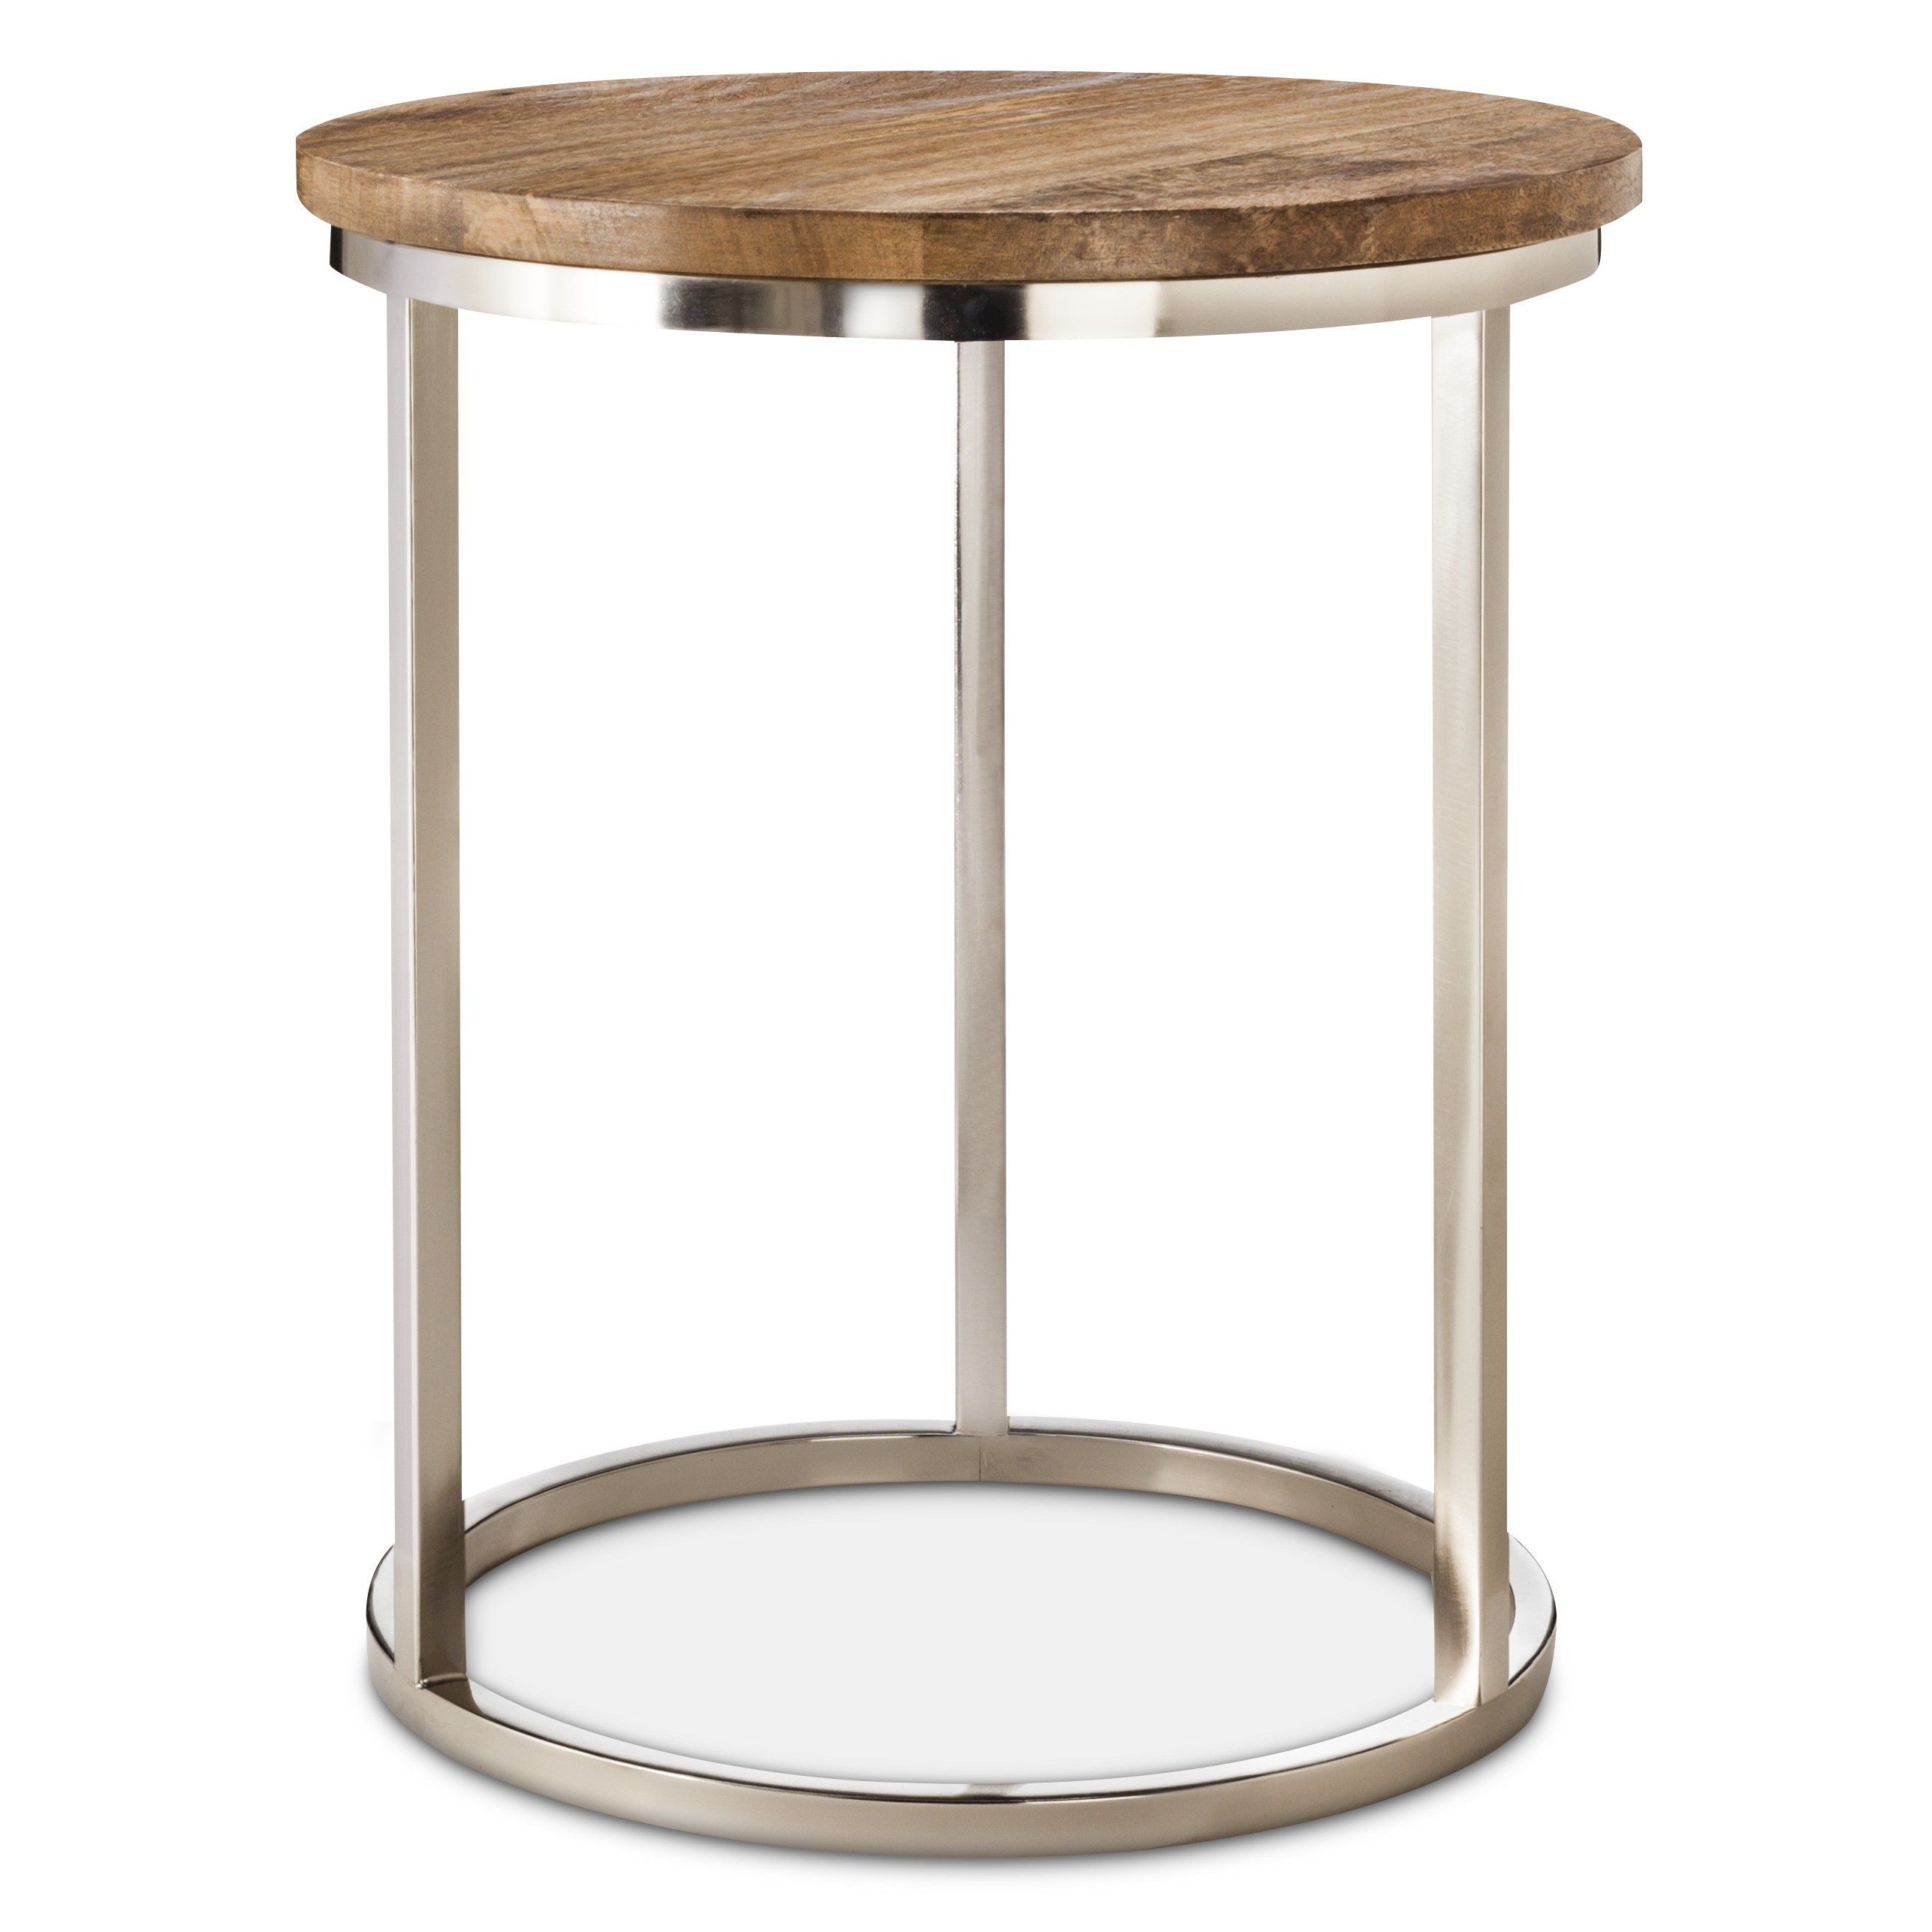 side table for glider threshold metal accent with wood top tables furniture target outdoor and chair covers rectangular round real end cooler coffee glass nest bamboo lamp whalen